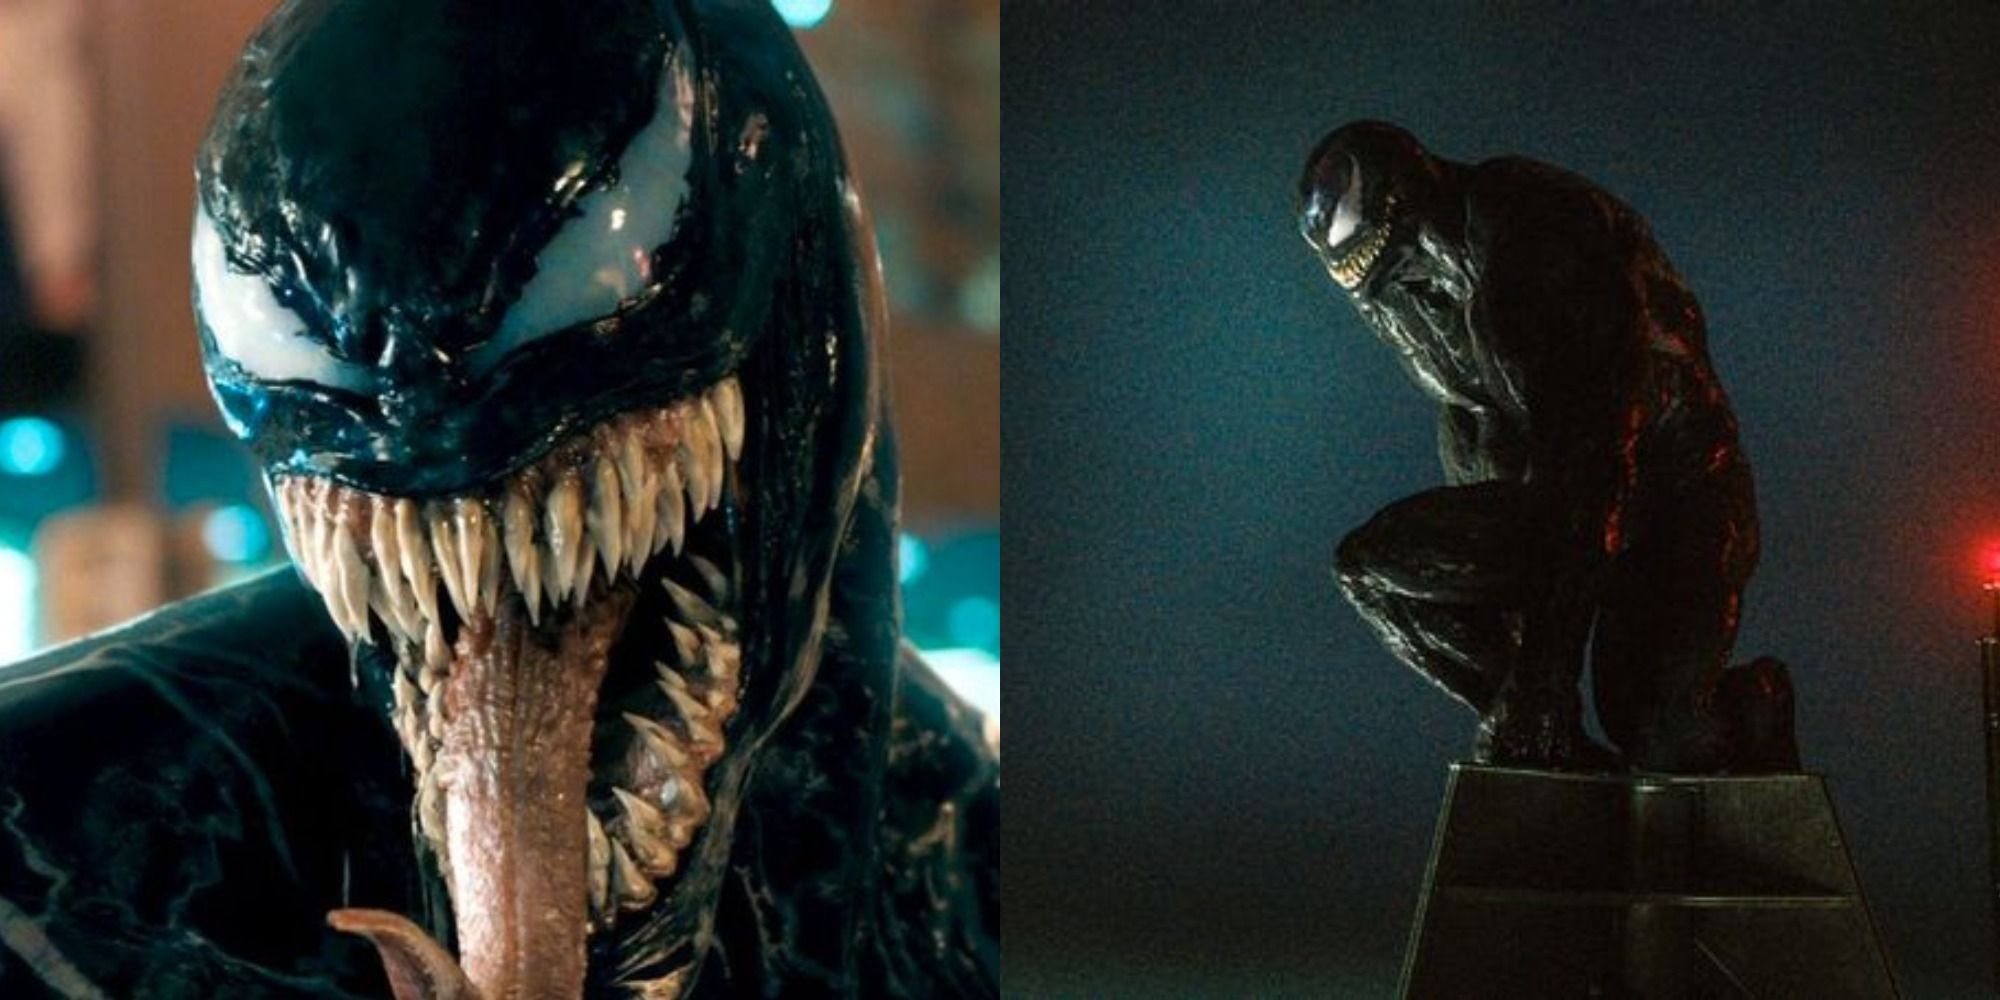 Split image of Venom opening his mouth and thinking on a rooftop